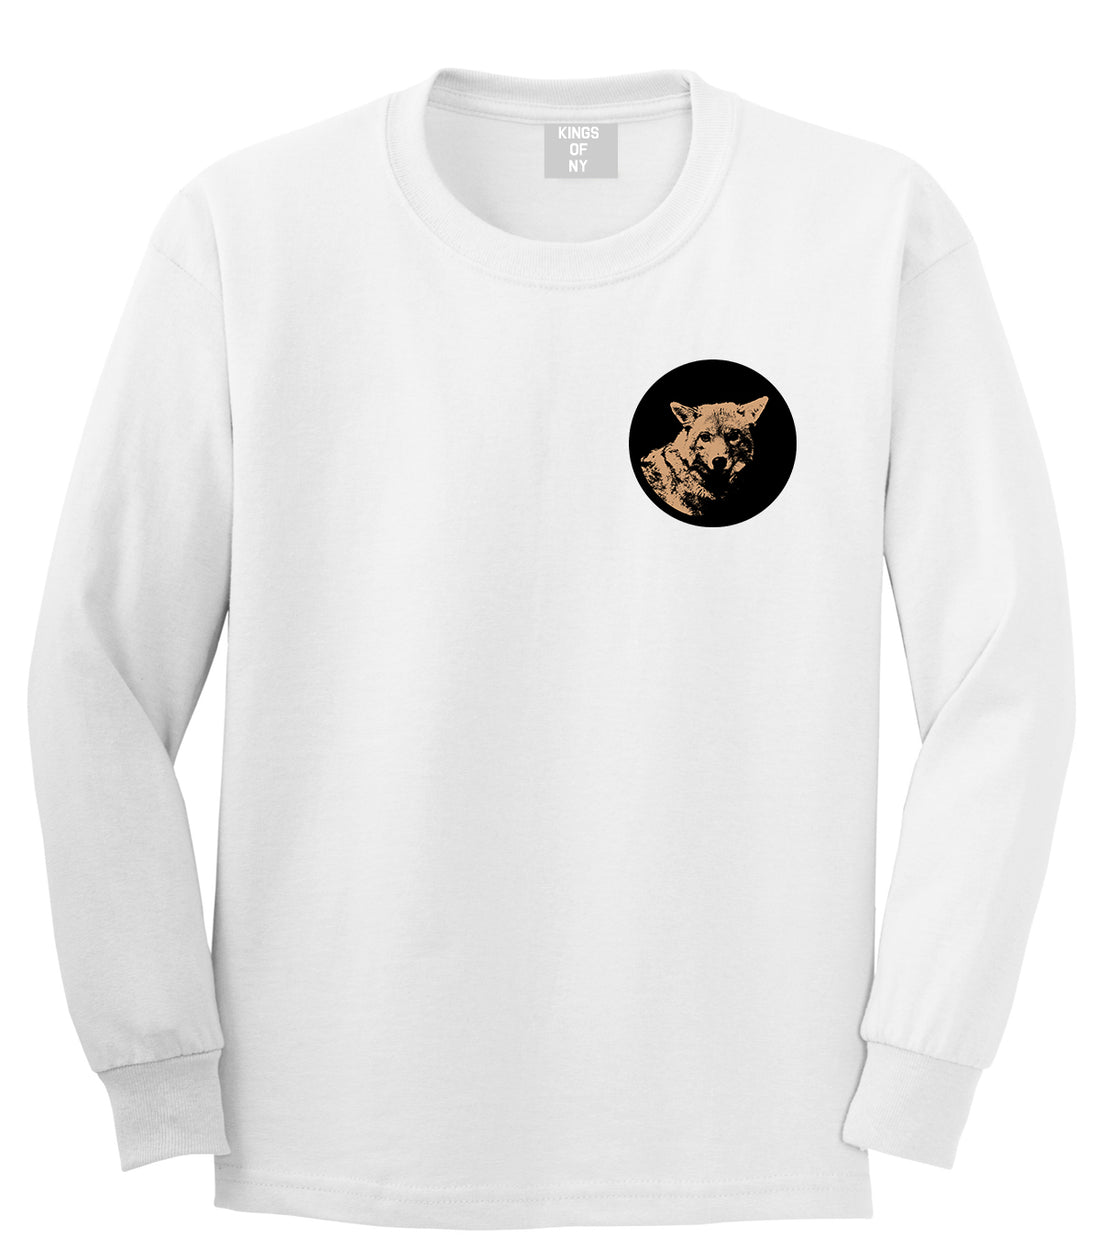 Coyote Chest White Long Sleeve T-Shirt by Kings Of NY